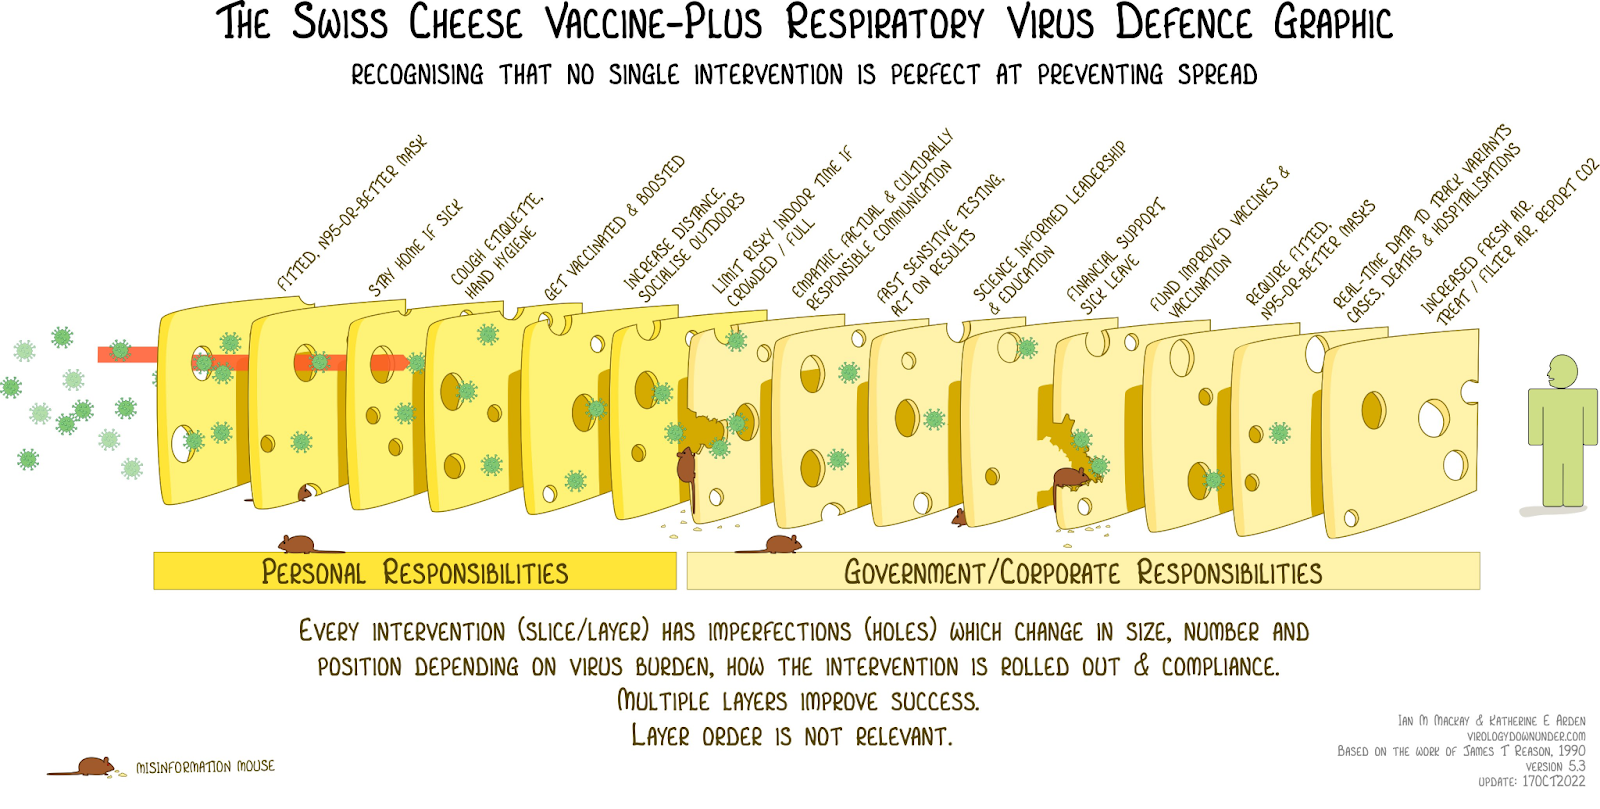 "Recognizing that no single intervention is perfect at preventing spread" An image of 14 layers of yellow swiss cheese. On the left of all the cheese, green virus particles! They float through the holes in the cheese from left to right, very few making it to the end where there is a green stick figure! Safe from the virus due to all the cheese.  Text above the layers of swiss cheese give examples of mitigations: 1) Fitted n95-or-better mask 2) Stay home if sick 3) Cough etiquette, hand hygiene  4) Get vaccinated & boosted 5) Increase distance, socialize outdoors 6) Limit risky indoor time if crowded / full 7) empathic, factual & culturally responsible communication 8) Fast, sensitive testing. Act on results 9) Science informed leadership & education 10) Financial support. Sick leave 11) Fund improved vaccines & vaccination  12) Require fitted, n95-or-better masks 13) Real-time data to track variants, cases, deaths & hospitalizations  14) Increased fresh air. Treat / filter air. Report CO2  Underneath swiss cheese layers 1-6 text says: "Personal responsibilities"  Underneath layers 7-14 text says: "Government/Corporate Responsibilities"  Every intervention (slice/layer) has imperfections (holes) which change in size, number and position depending on virus burden, how the intervention is rolled out & compliance. Multiple layers improve success. Layer order is not relevant.